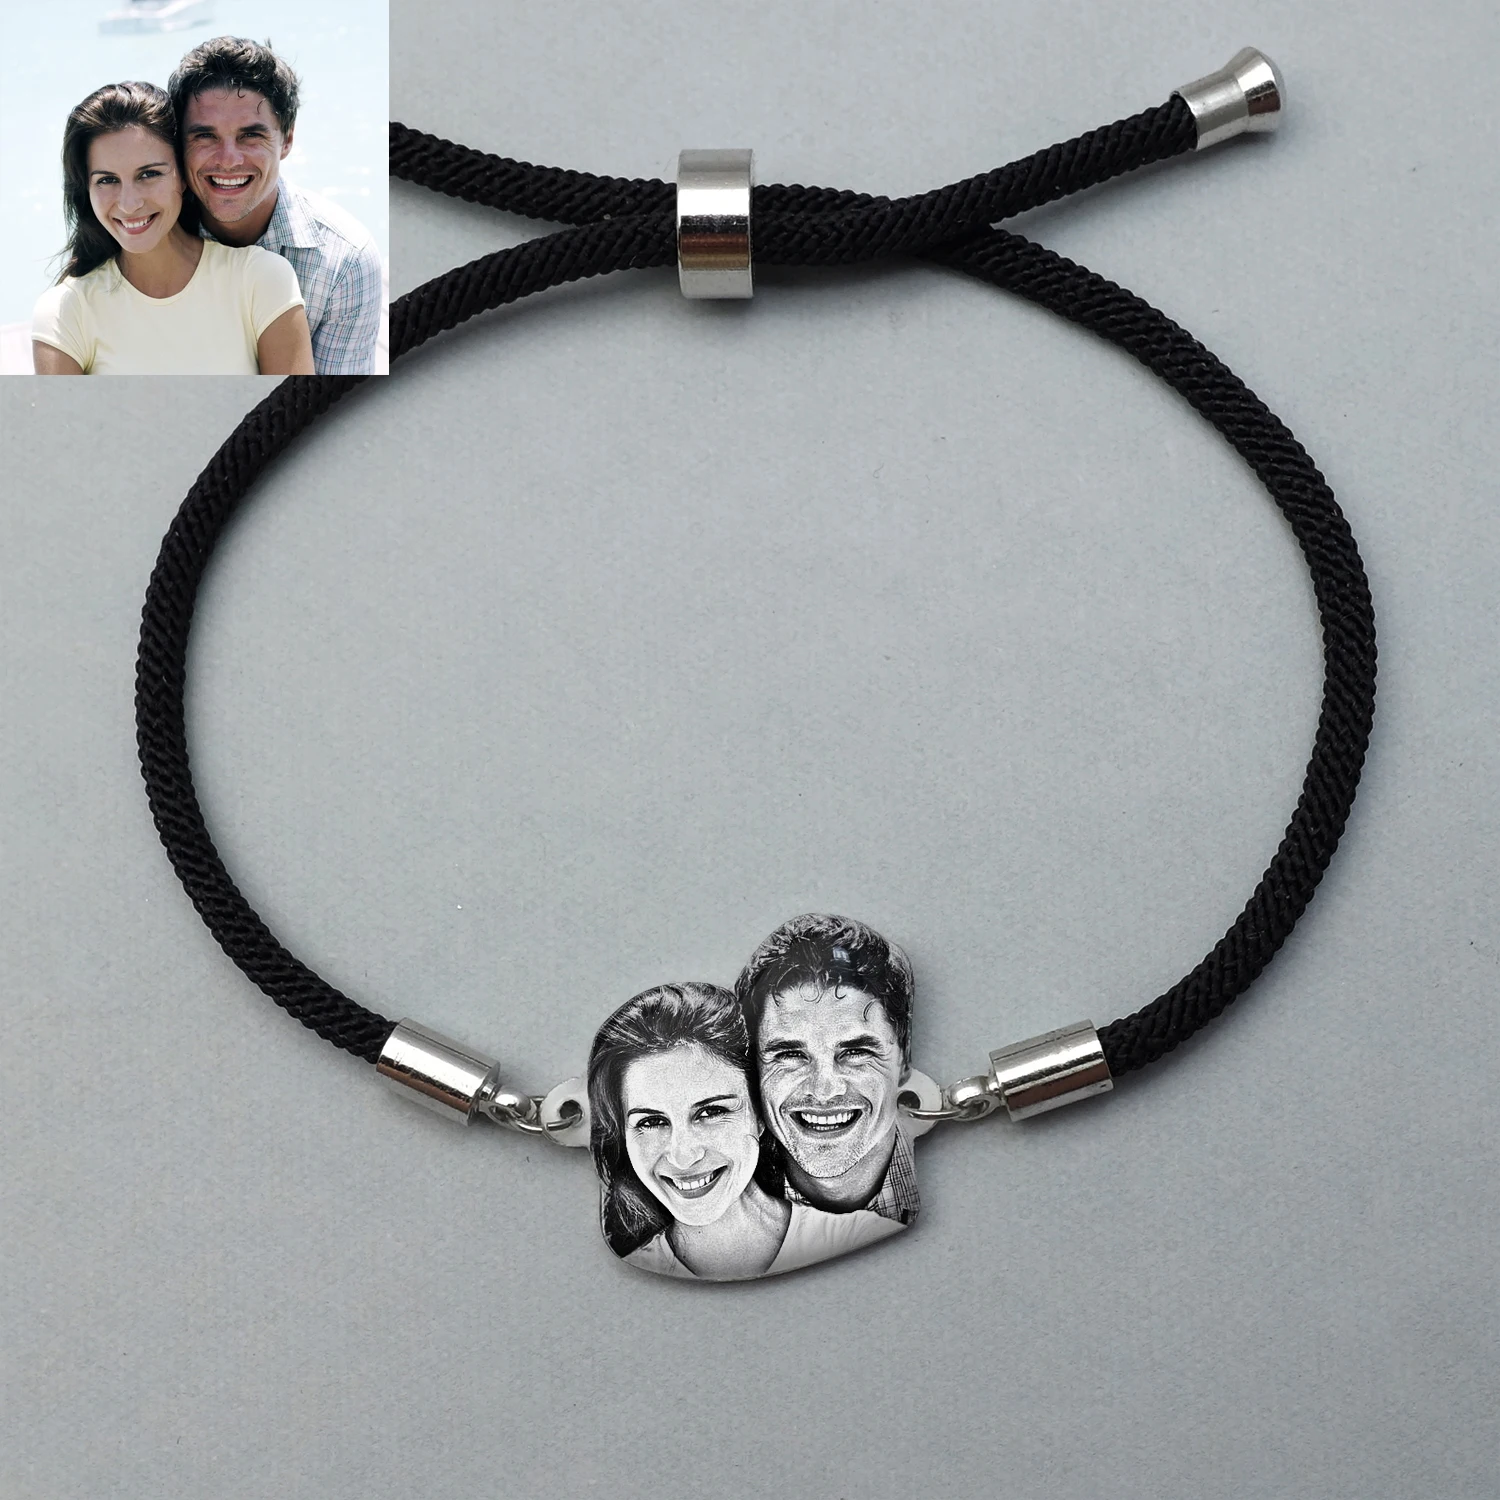 Custom Photo Charm Bracelet Personalized Picture Jewelry Couples Birthday Lover Family Memory Keepsake Christmas Gift for Her custom picture necklace personalized photo necklace engraved photo jewelry family keepsake mother gifts valentines day gift